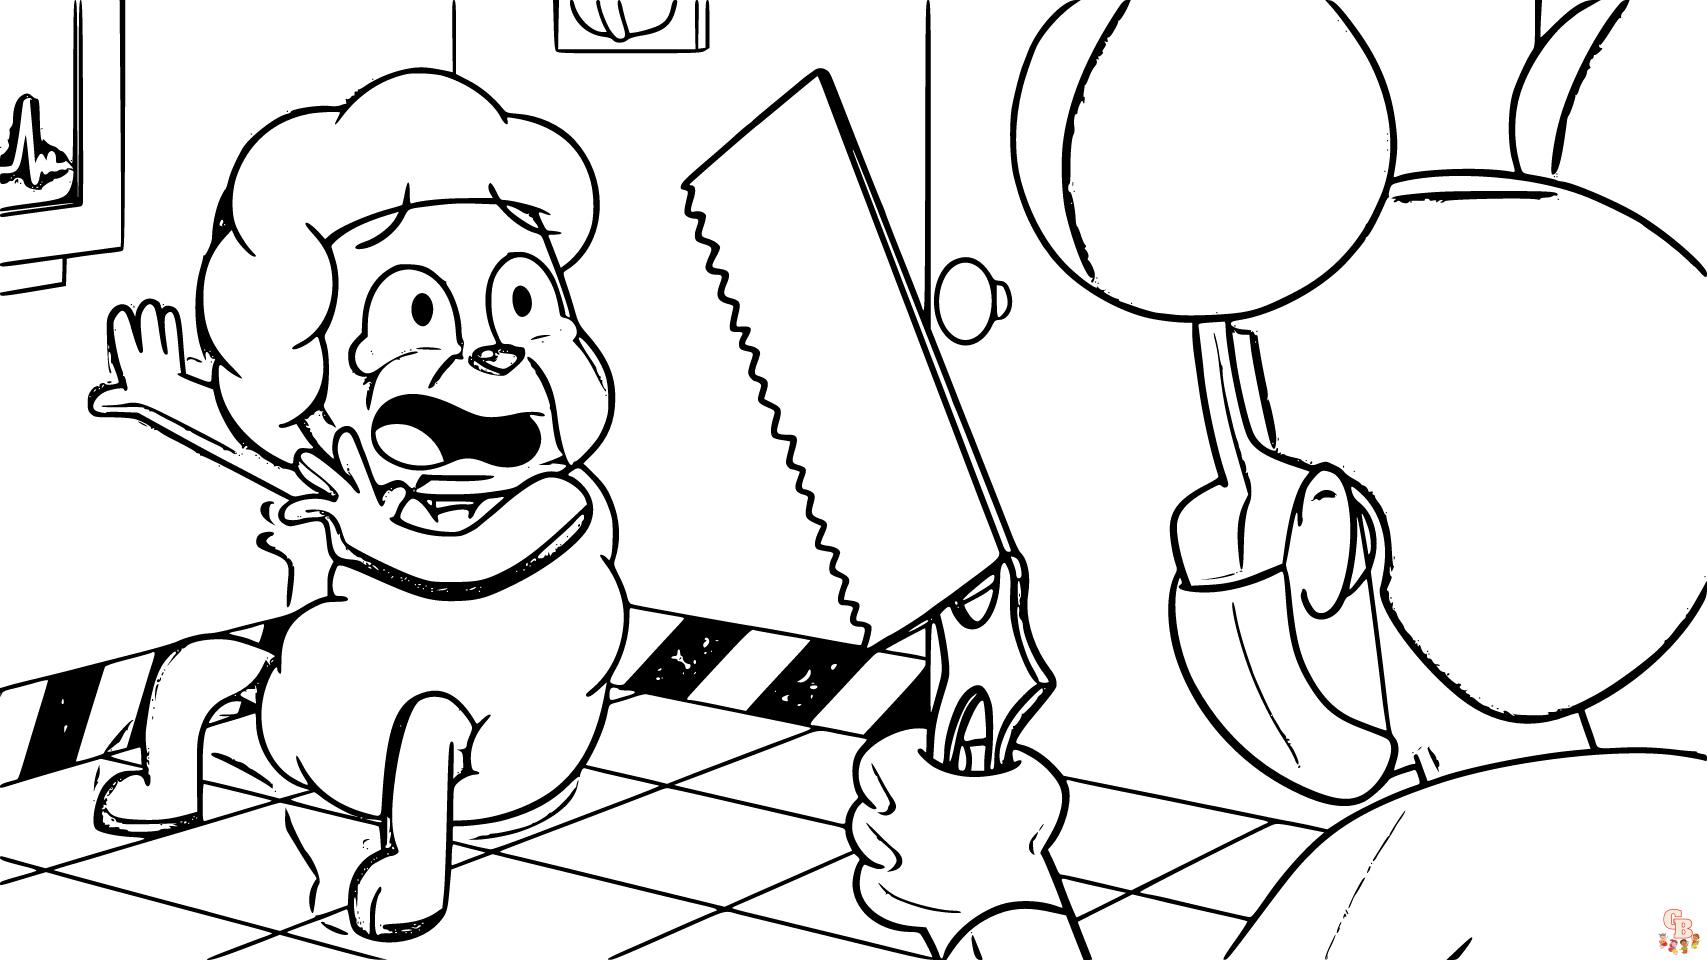 Explore the World of Amanda the Adventurer Coloring Pages